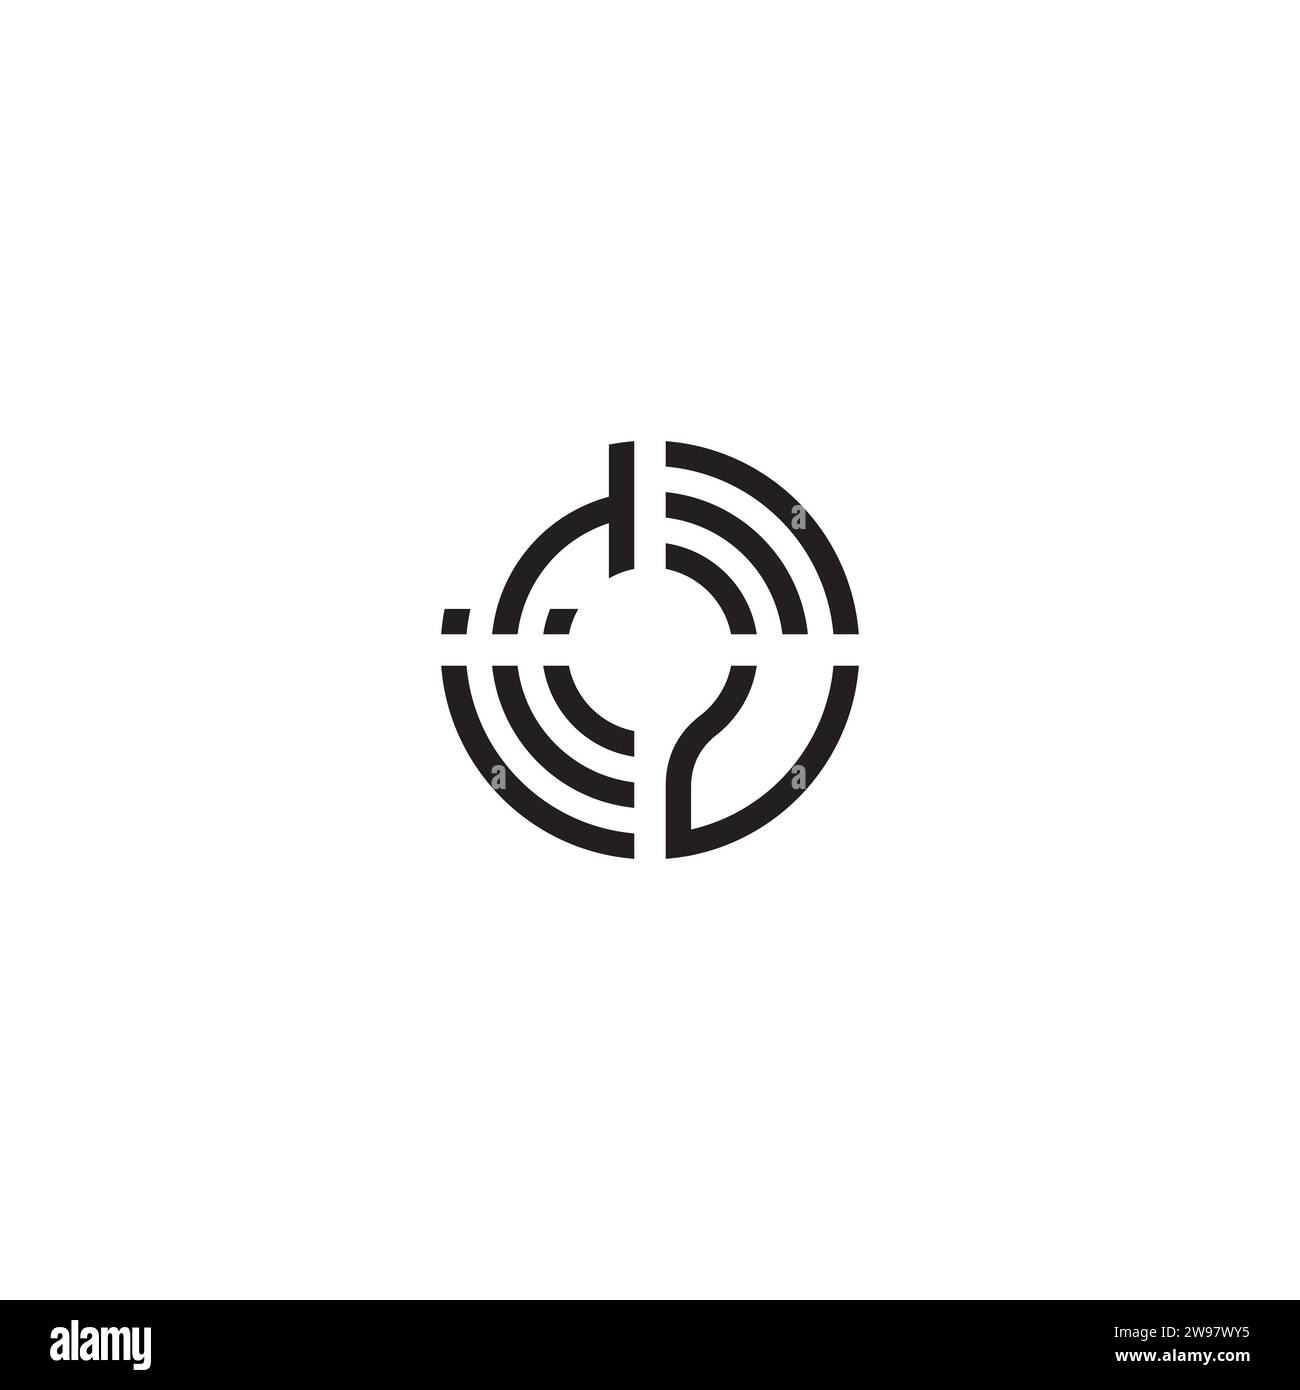 VT circle initial logo concept in high quality professional design that will print well across any print media Stock Vector